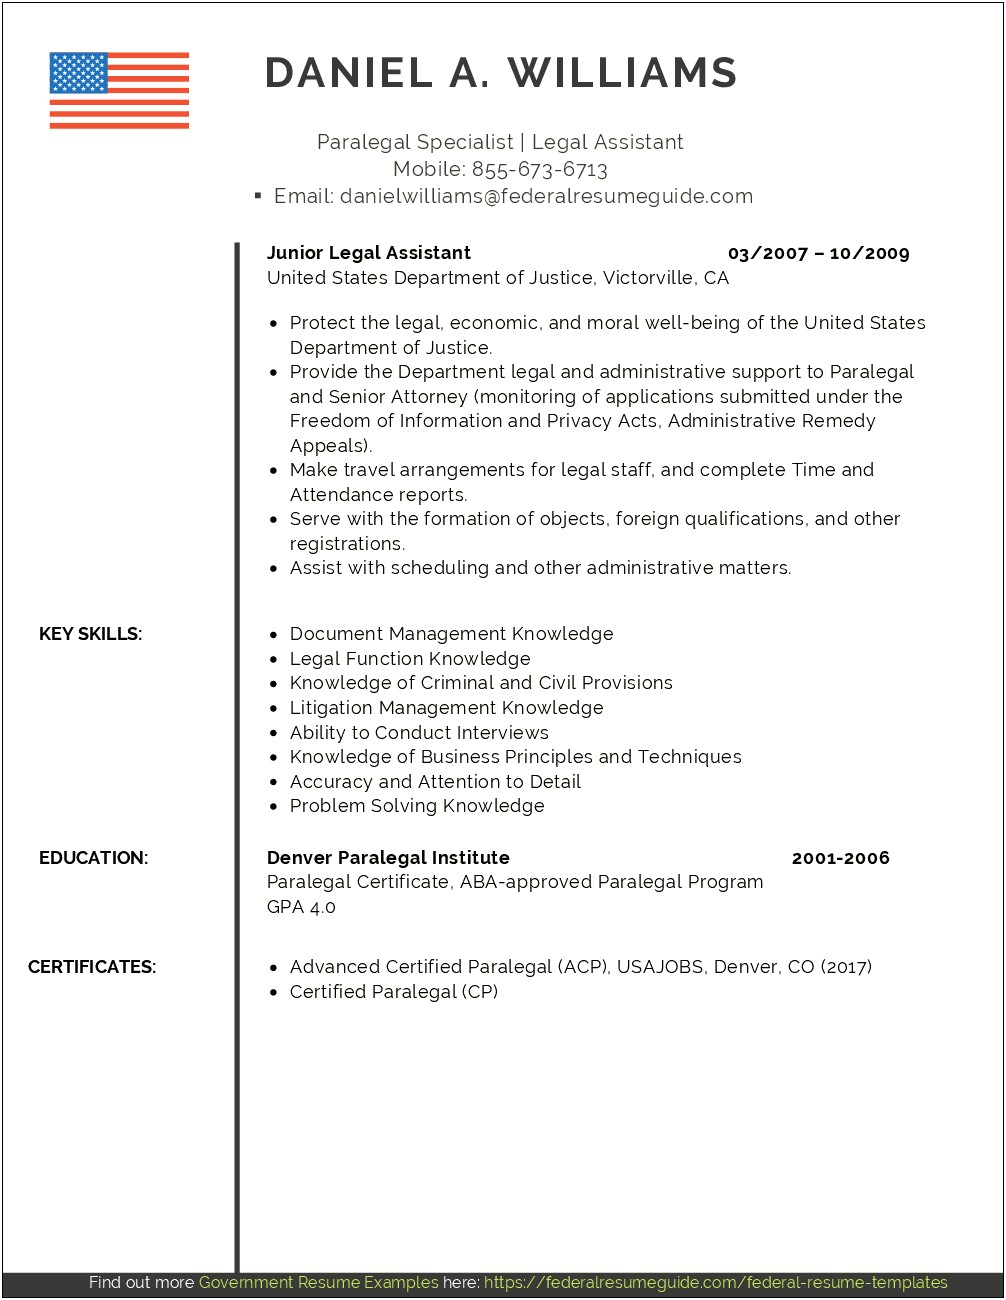 Most Recent Federal Resume Sample 2017